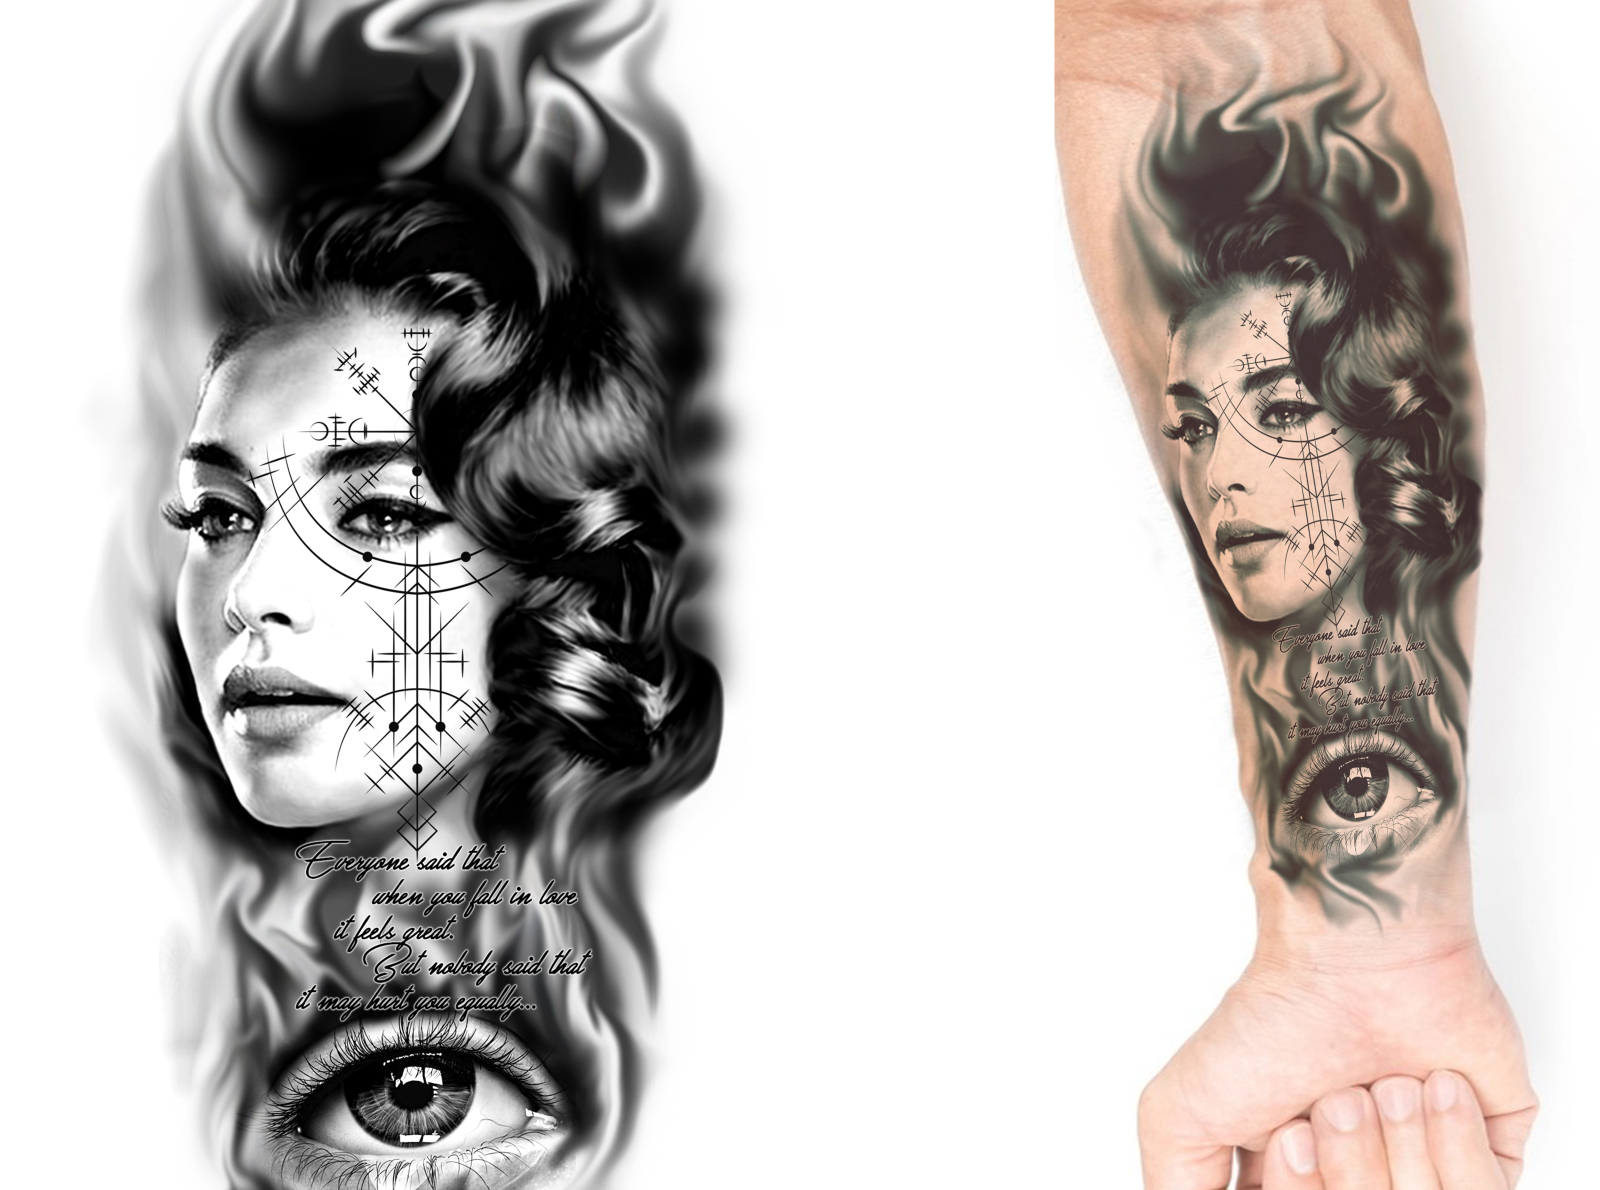 Realism Tattoos: A Complete Guide With 85 Images - AuthorityTattoo